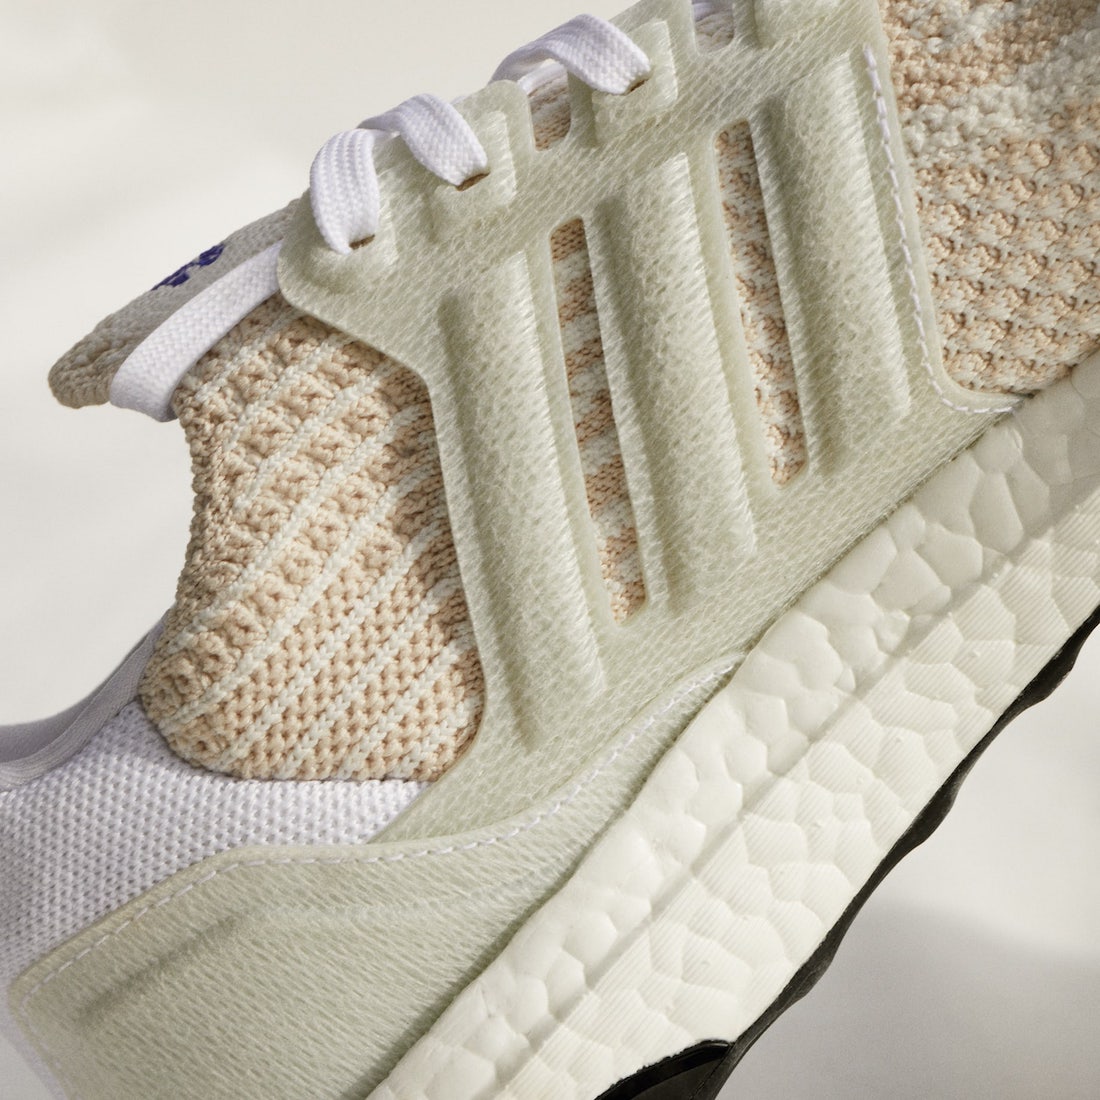 Adidas Ultra Boost Halo Ivorybuy Clothing Accessories Online At Low Prices 21 New Items Limited Time Offer Off 58 Free Shipping Fast Shippment